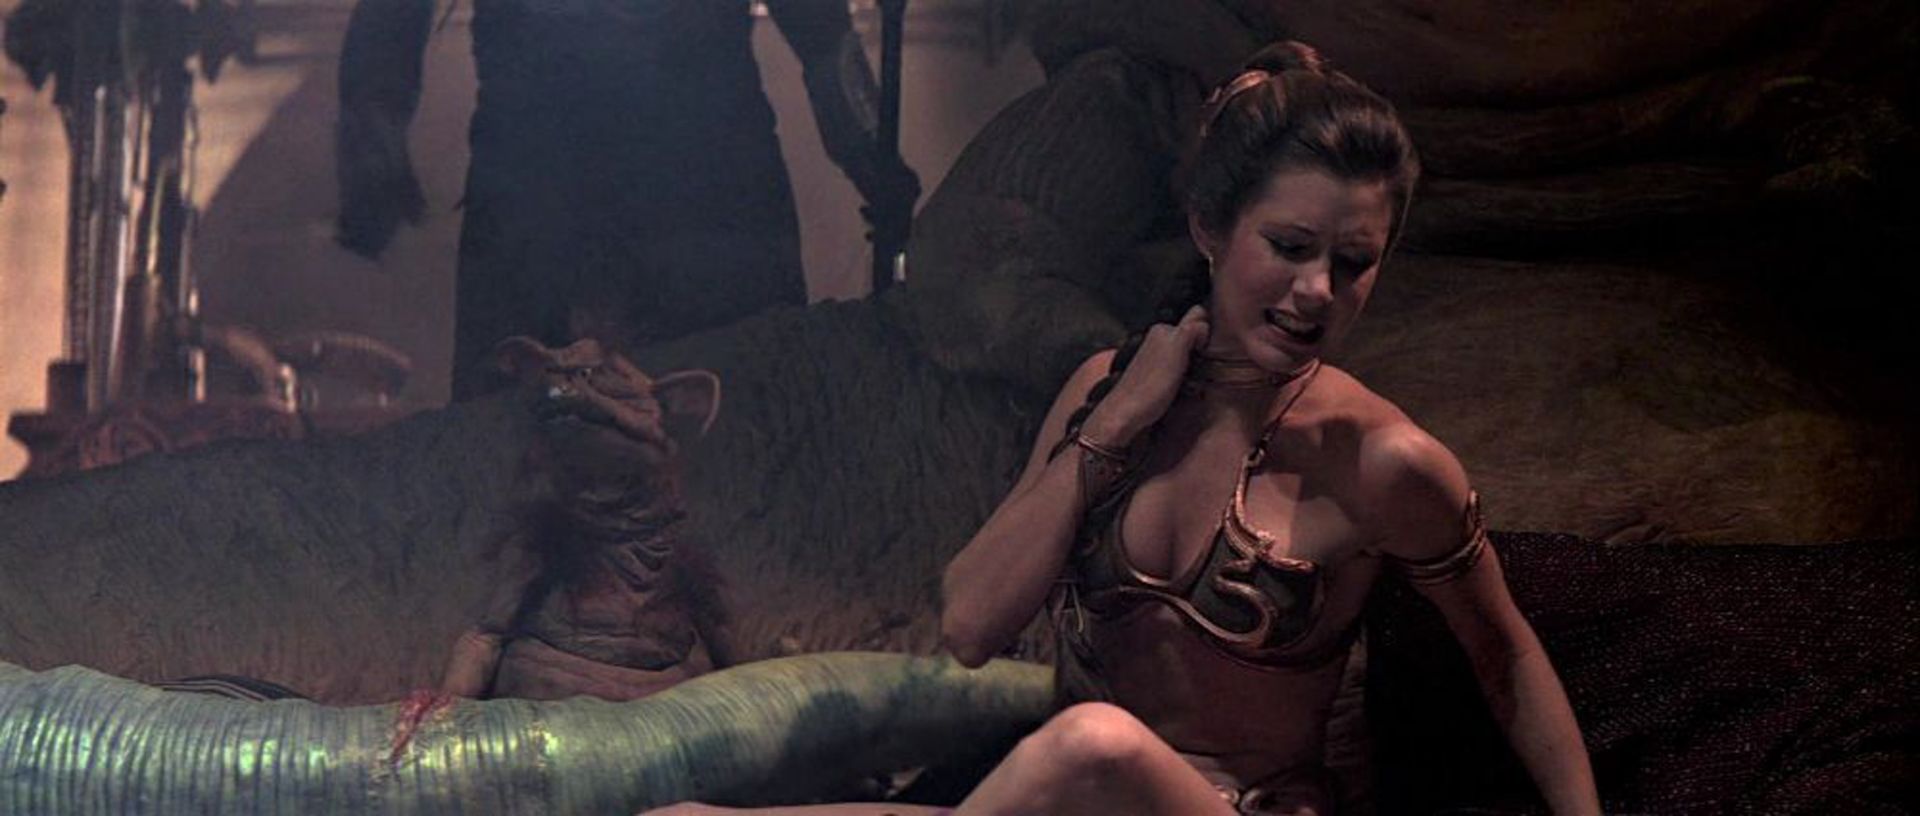 STAR WARS - RETURN OF THE JEDI | CARRIE FISHER "PRINCESS LEIA ORGANA" JABBA THE HUTT SLAVE COSTUME P - Image 50 of 54